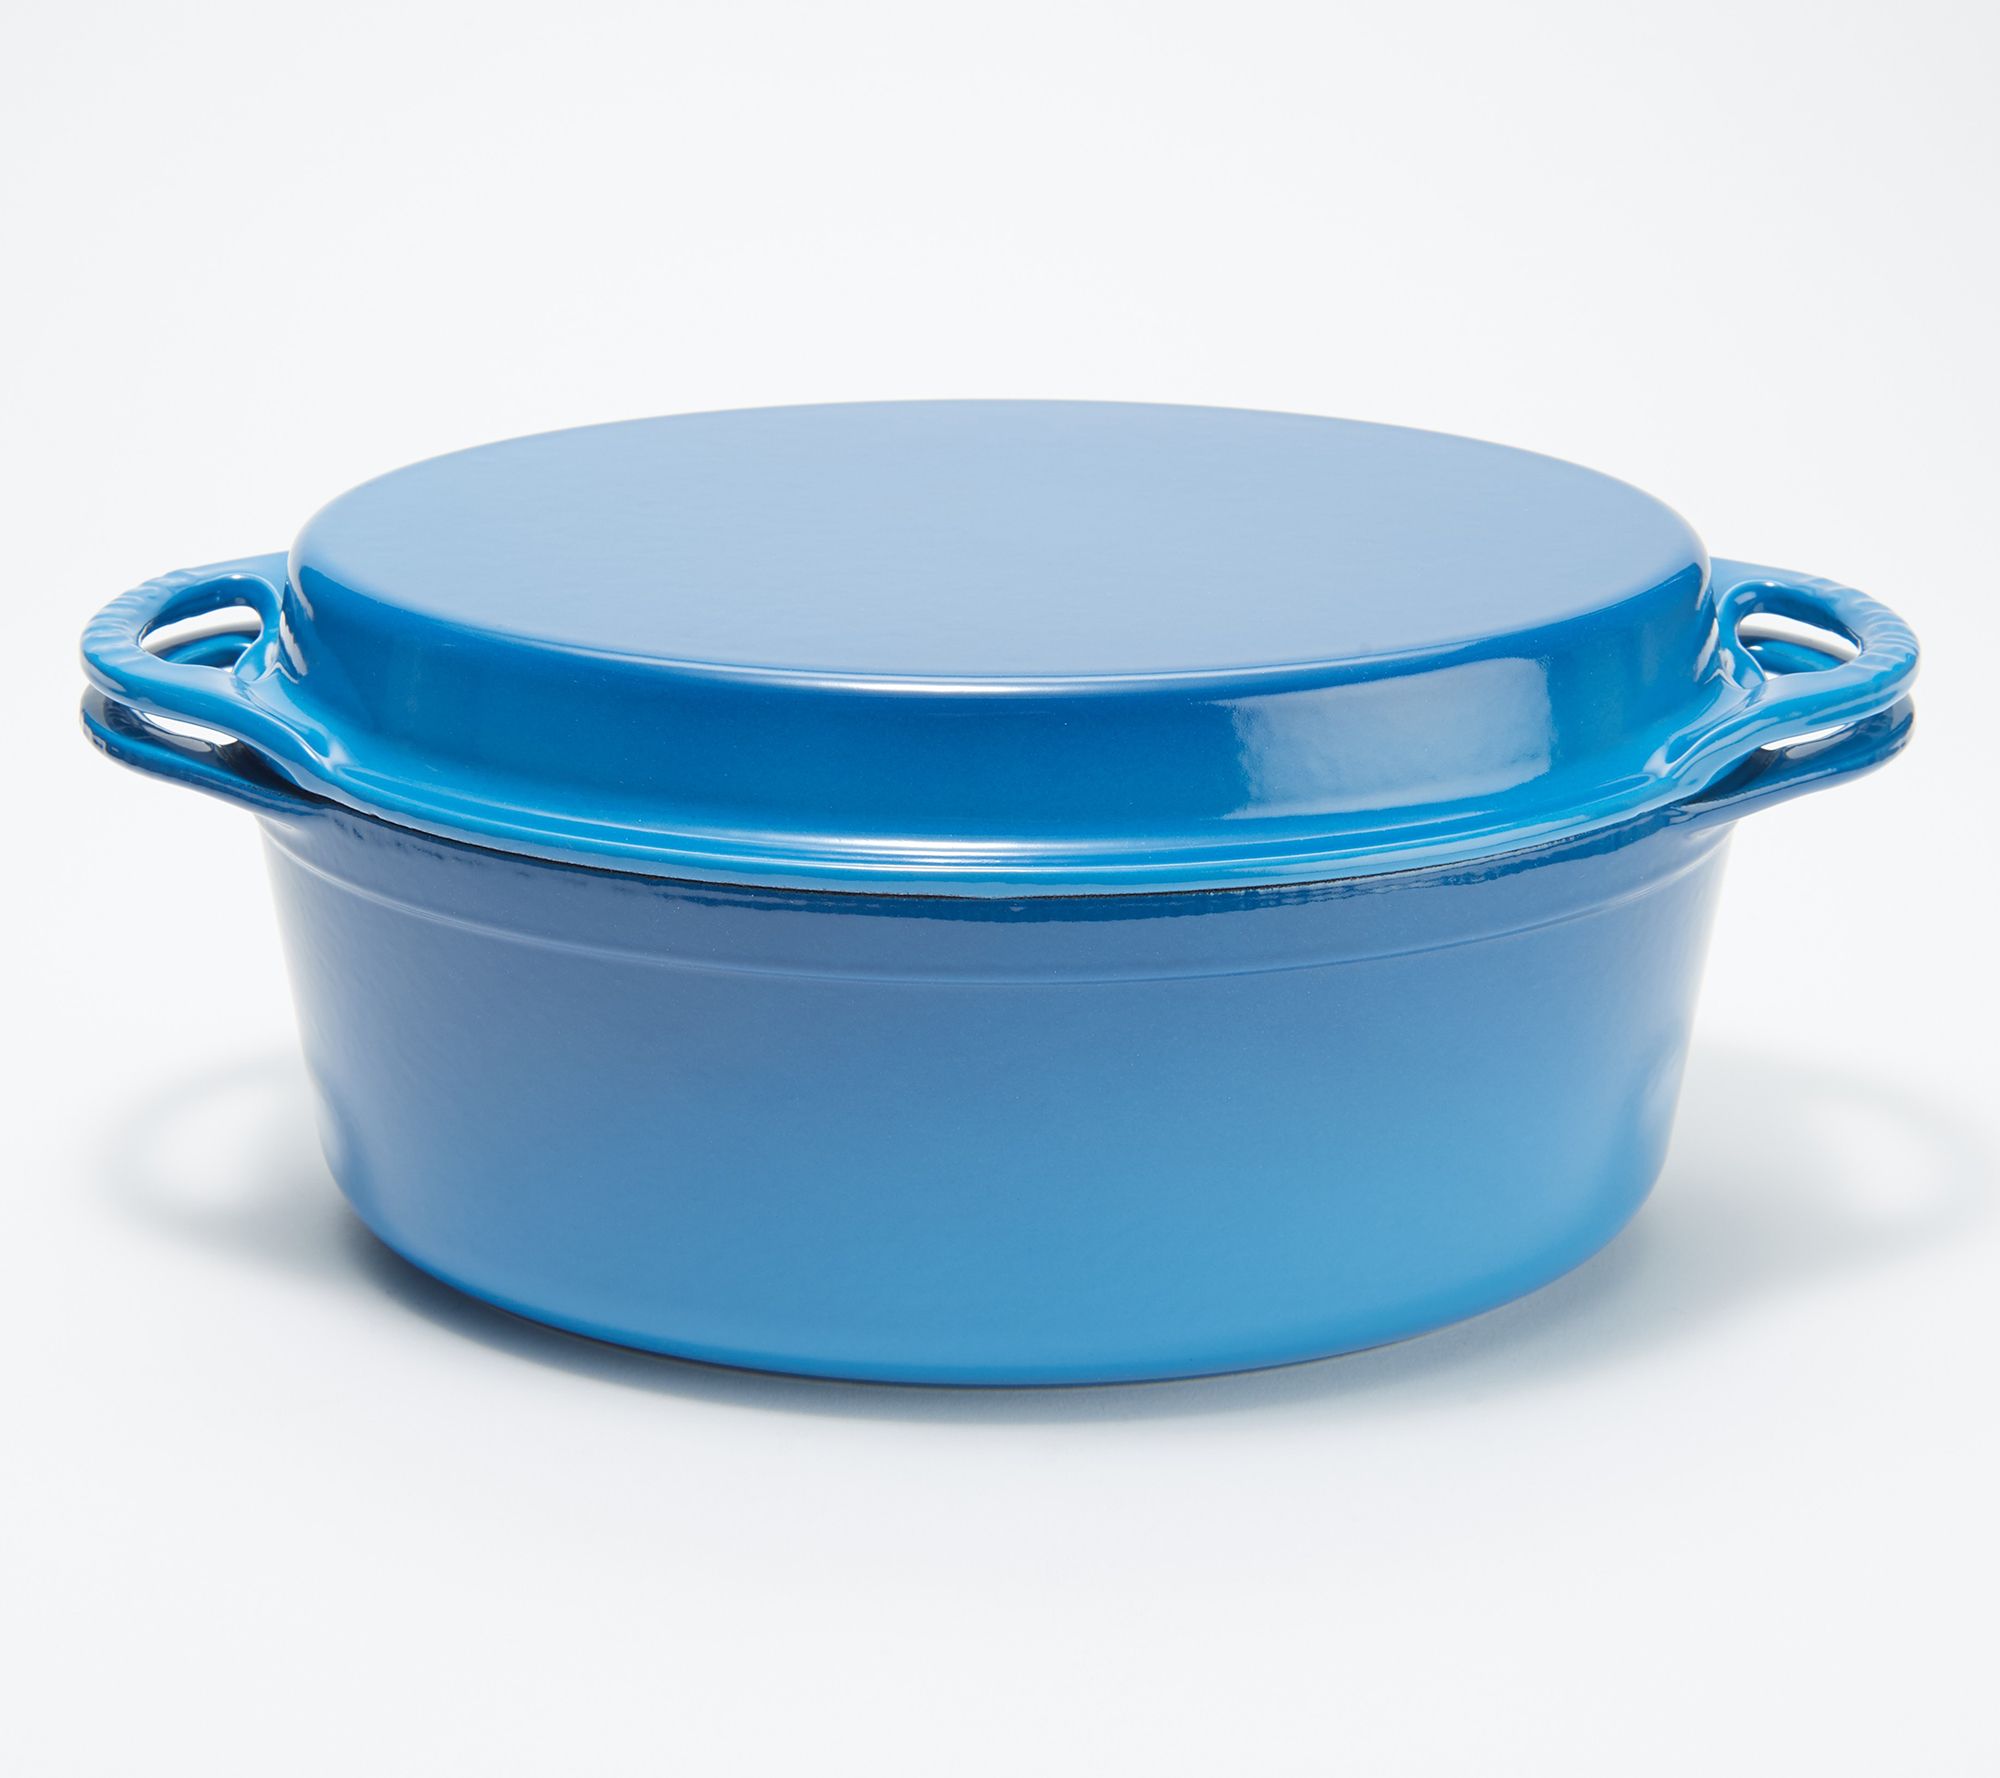 This Le Creuset cast-iron Dutch oven has lid that doubles as a grill  pan—and it's $42 off today